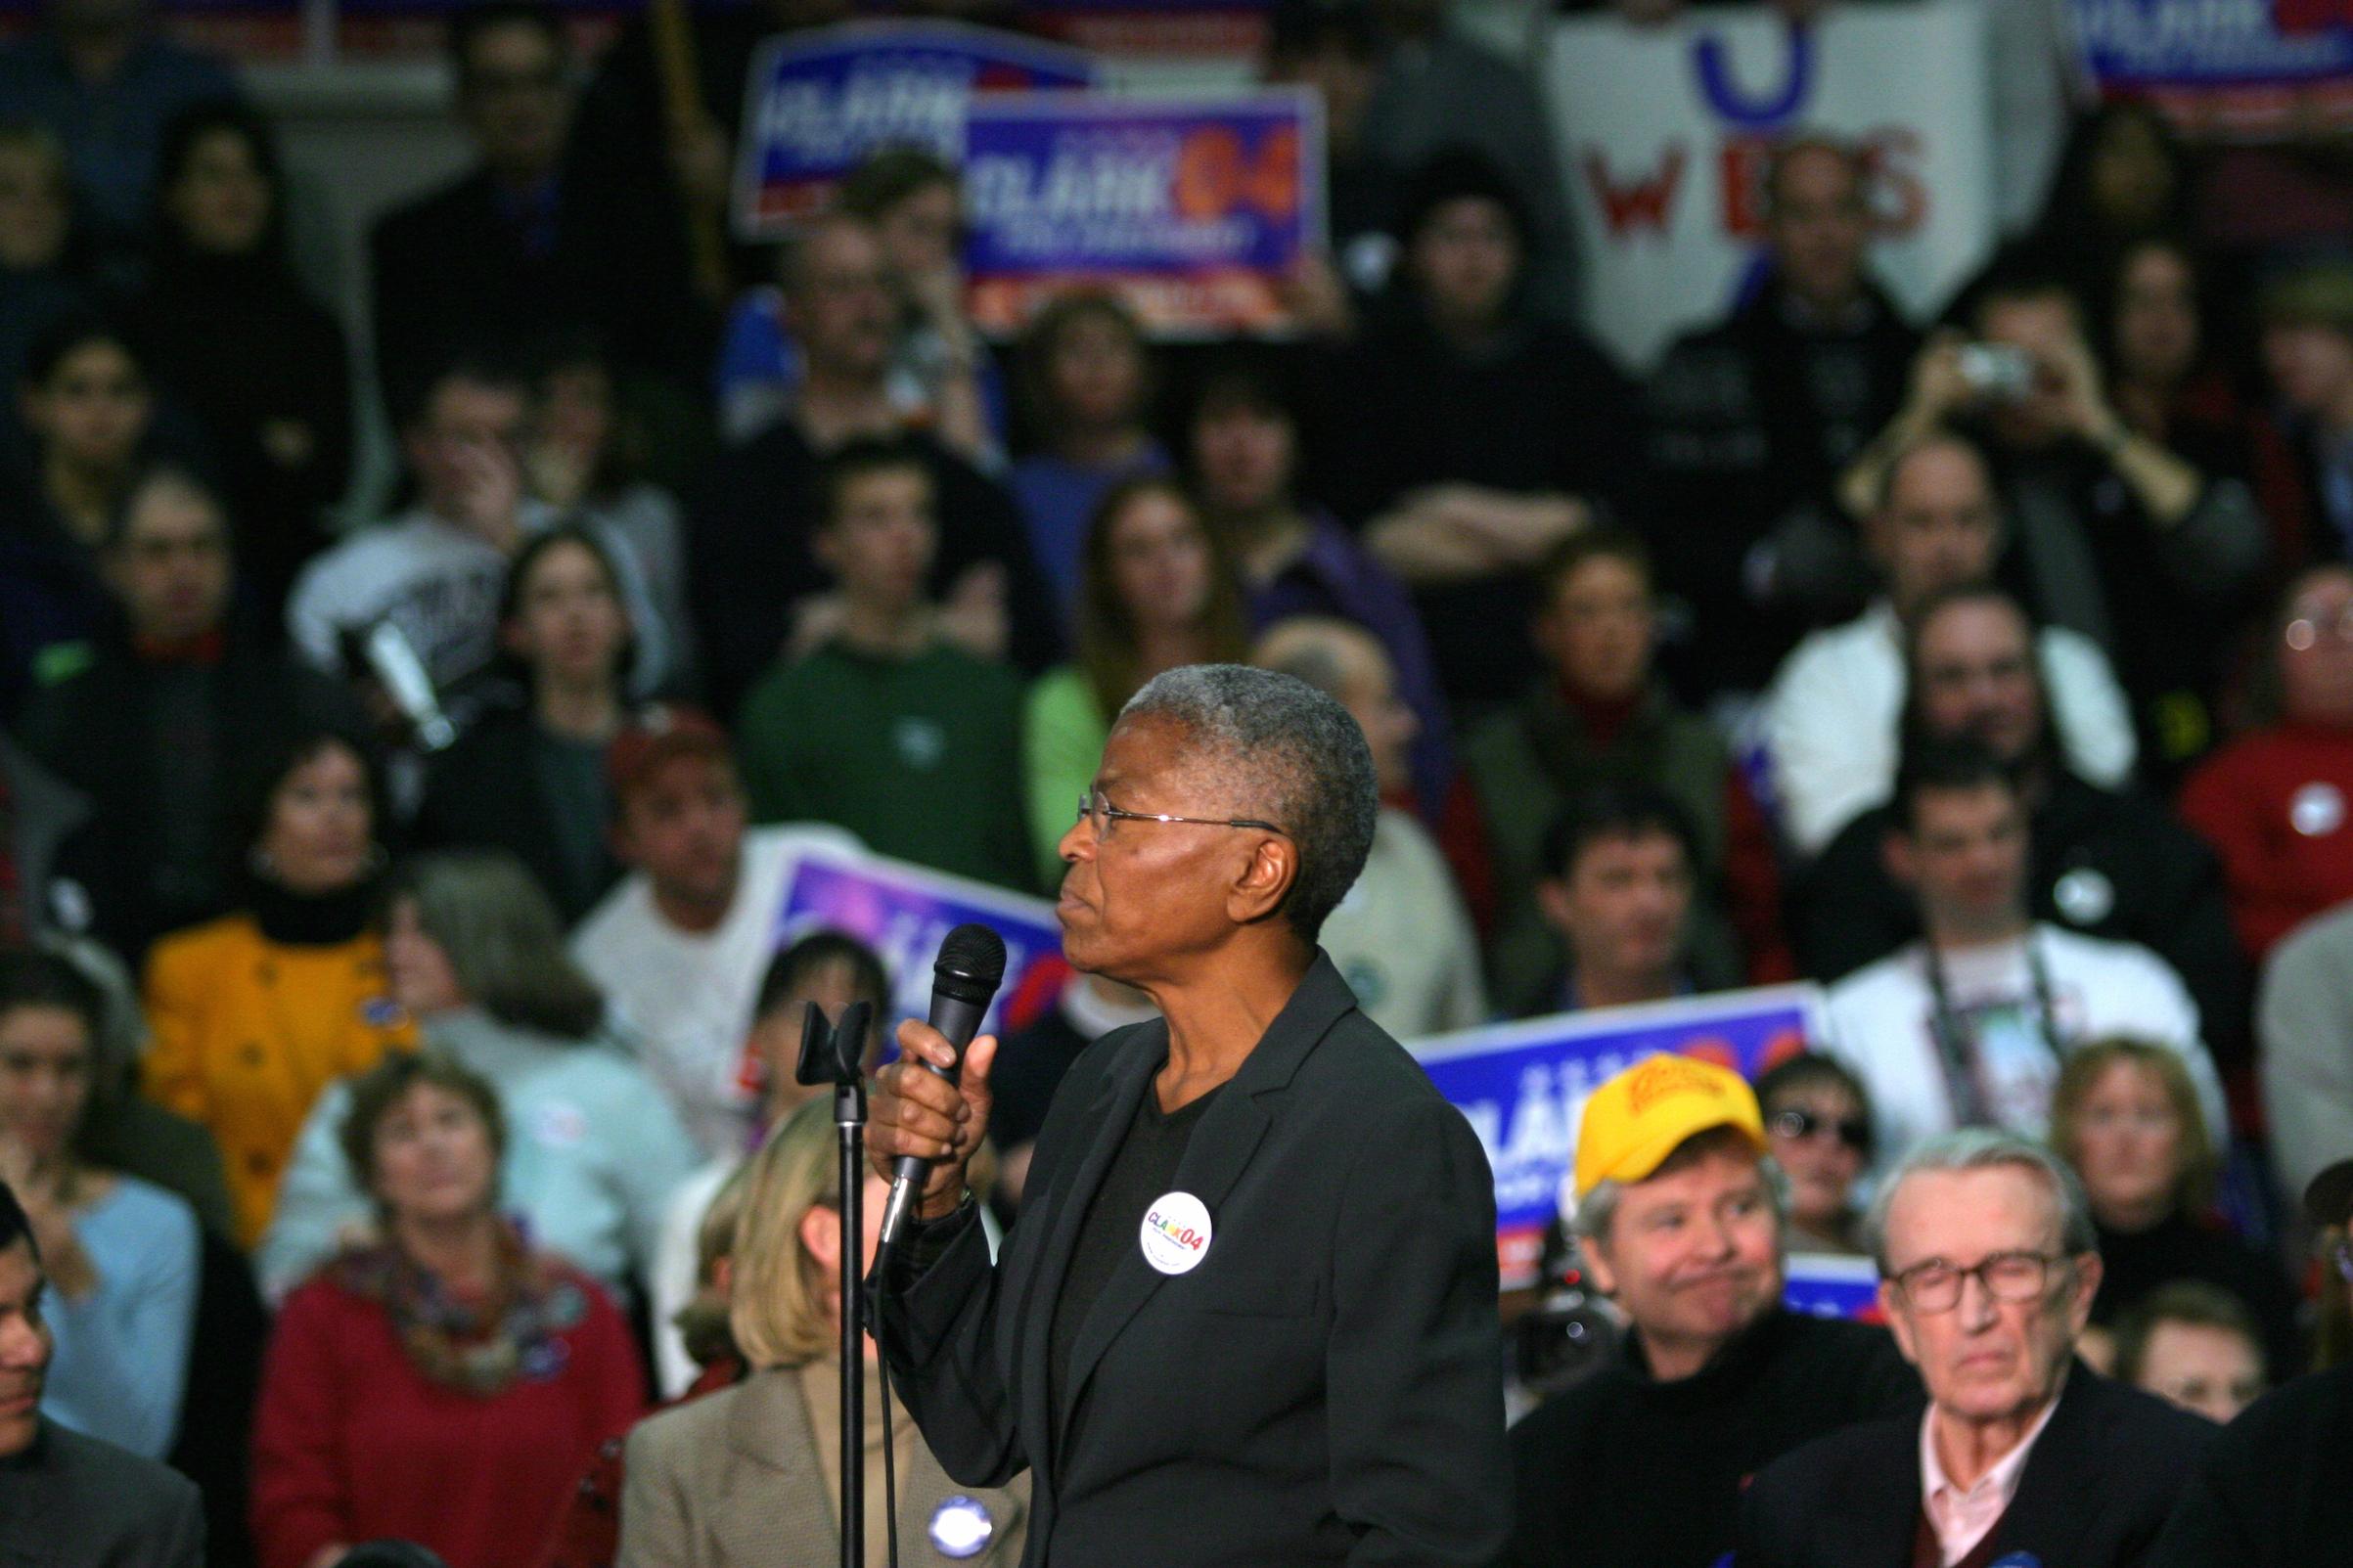 Mary Frances Berry, as Chairperson of the U.S. Commission on Civil Rights, addresses a supporters at a Democratic presidential rally in 2004. (Rick Friedman—Corbis via Getty Images)